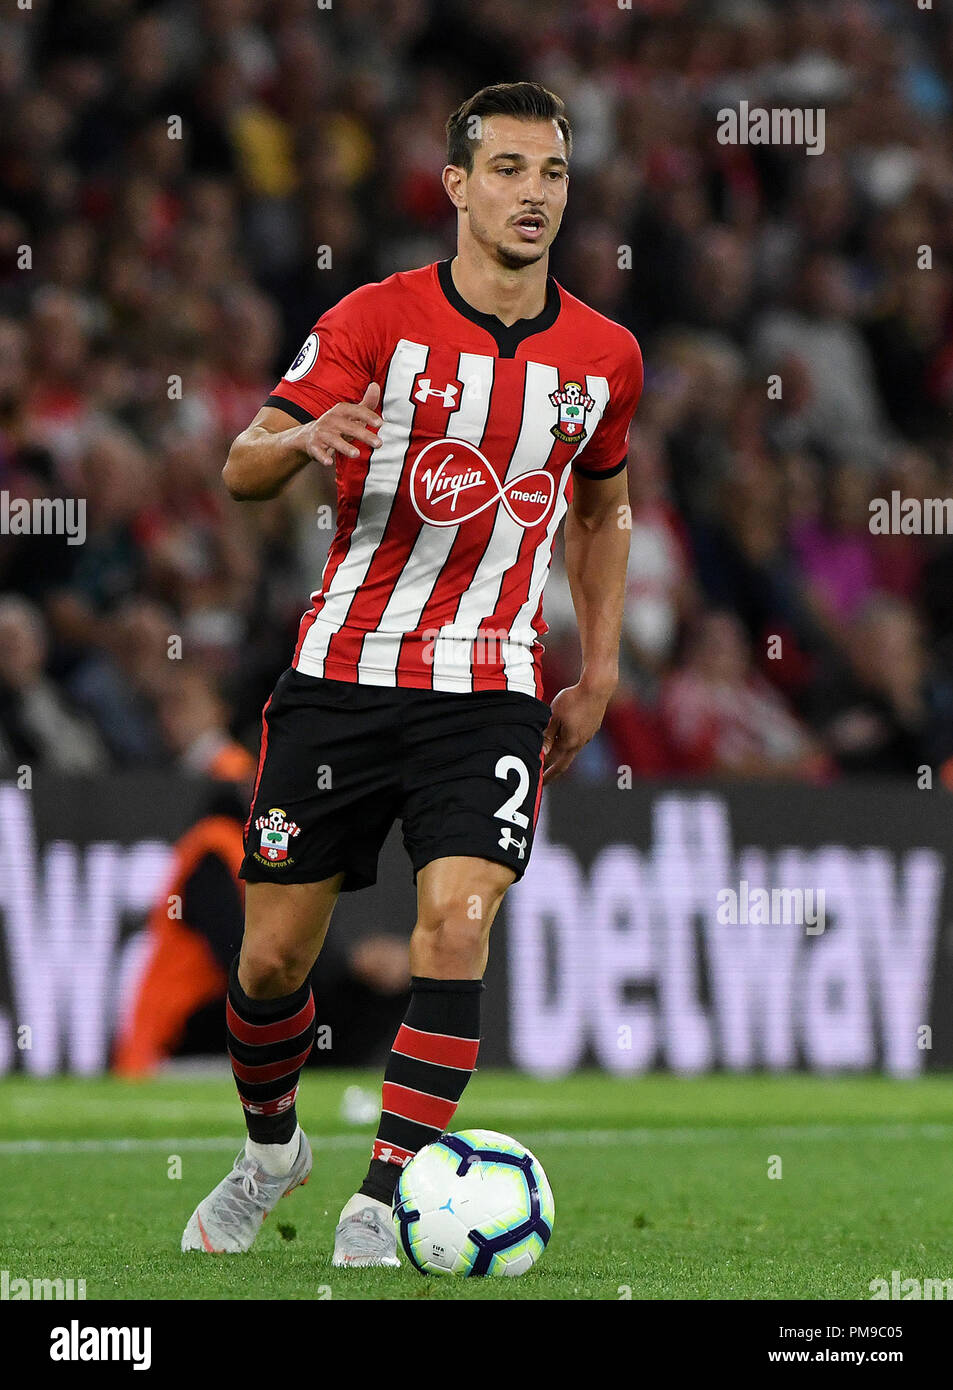 Southampton, UK. 17th September 2018. Cedric Soares of Southampton - Southampton v Brighton & Hove Albion, Premier League, St Mary's Stadium, Southampton - 17th September 2018  uding those listed as 'live' Credit: Richard Calver/Alamy Live News Credit: Richard Calver/Alamy Live News Stock Photo